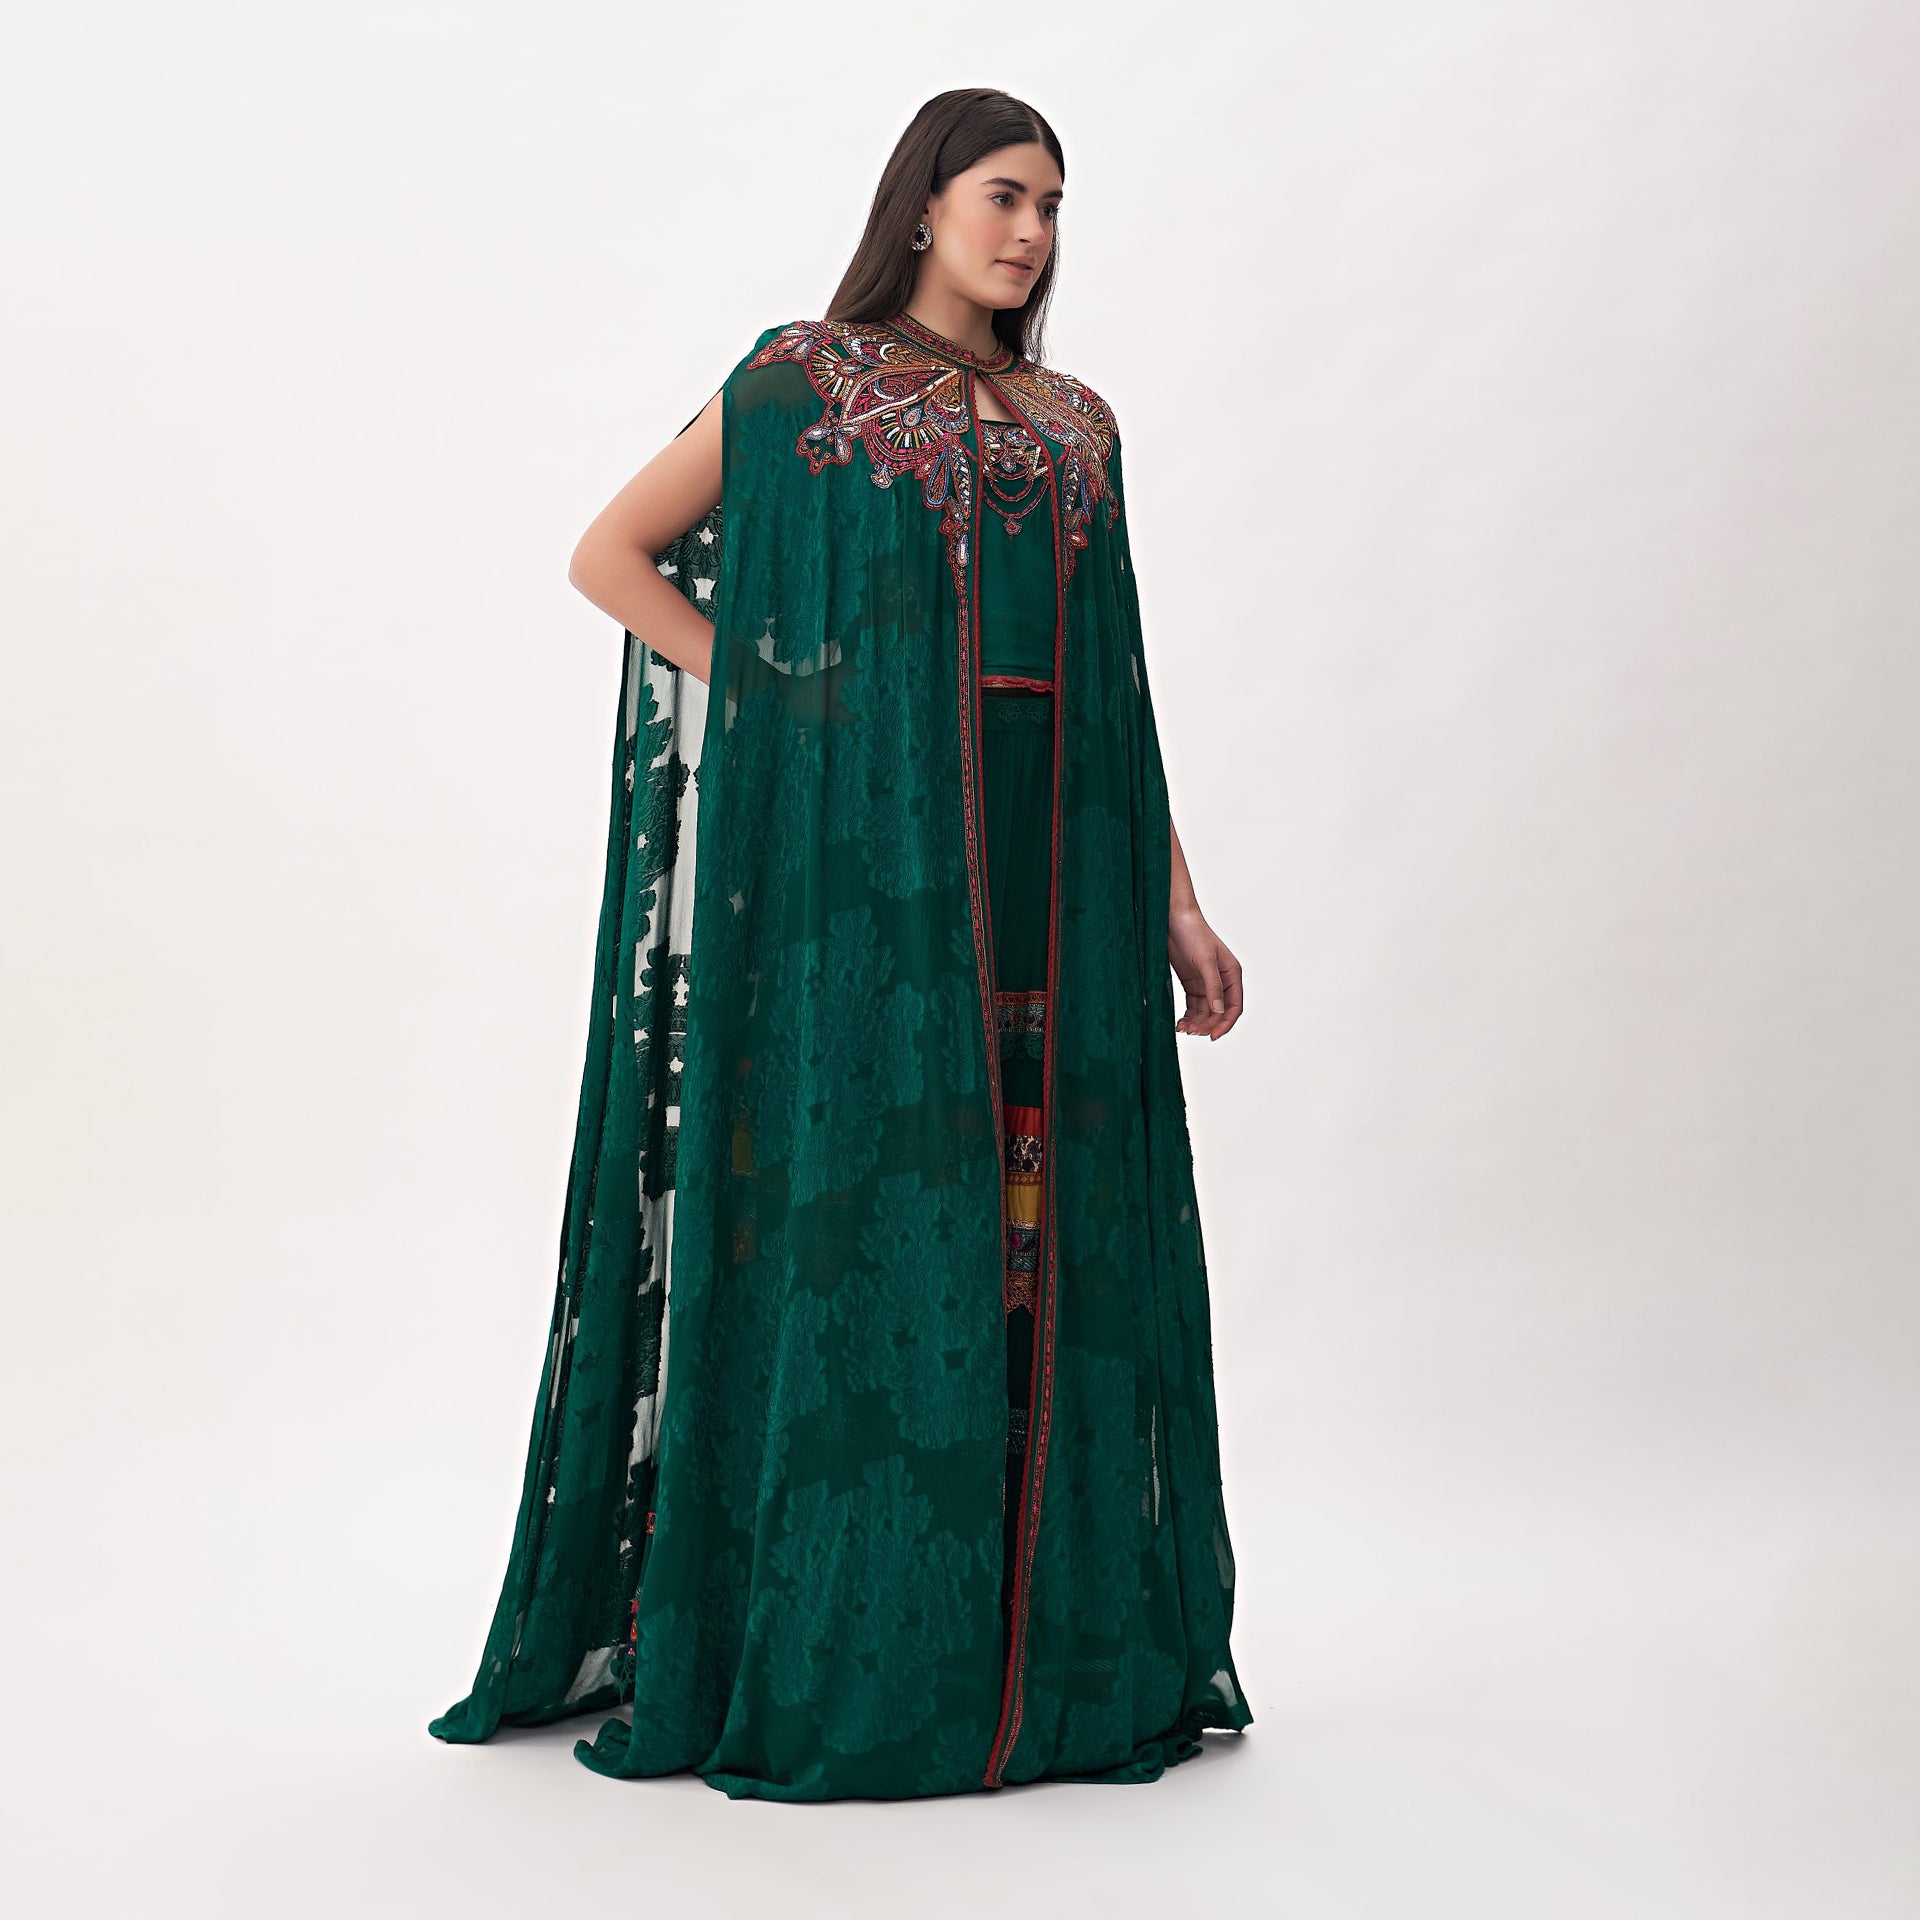 Green Embroidery Sleeveless Rustella Dress With Cape From Shalky